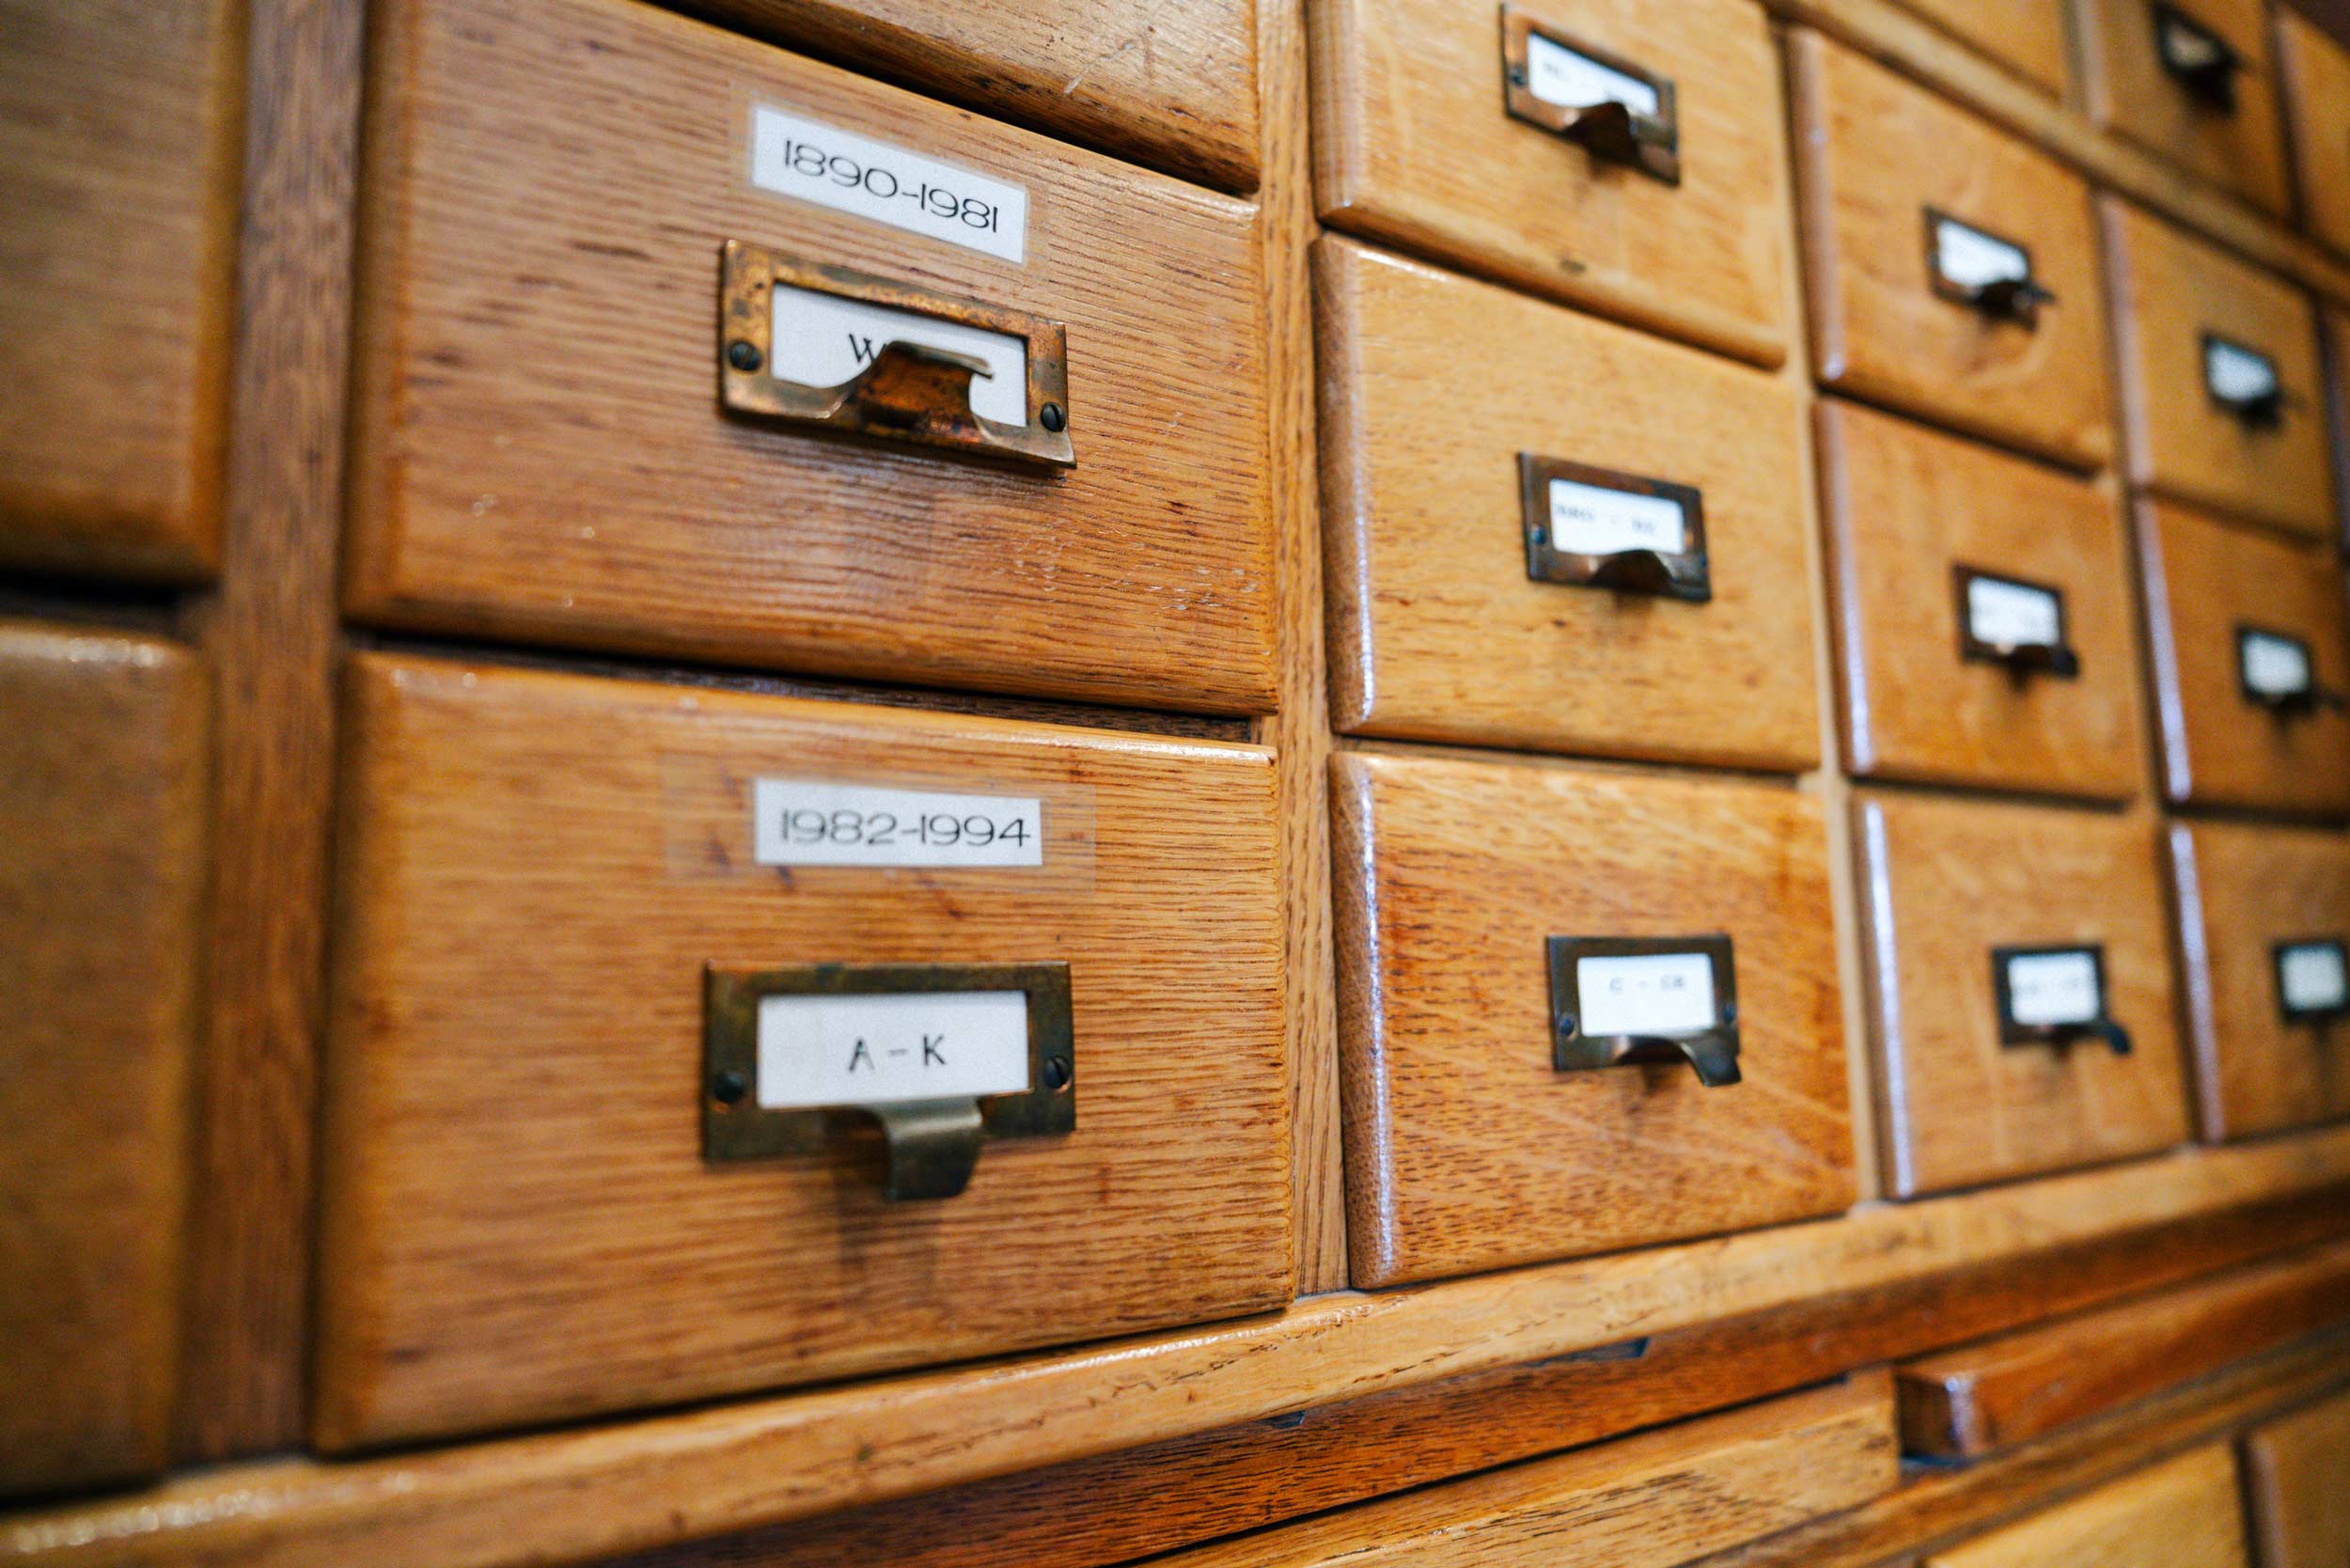 A close up of the last UVA library card catalog